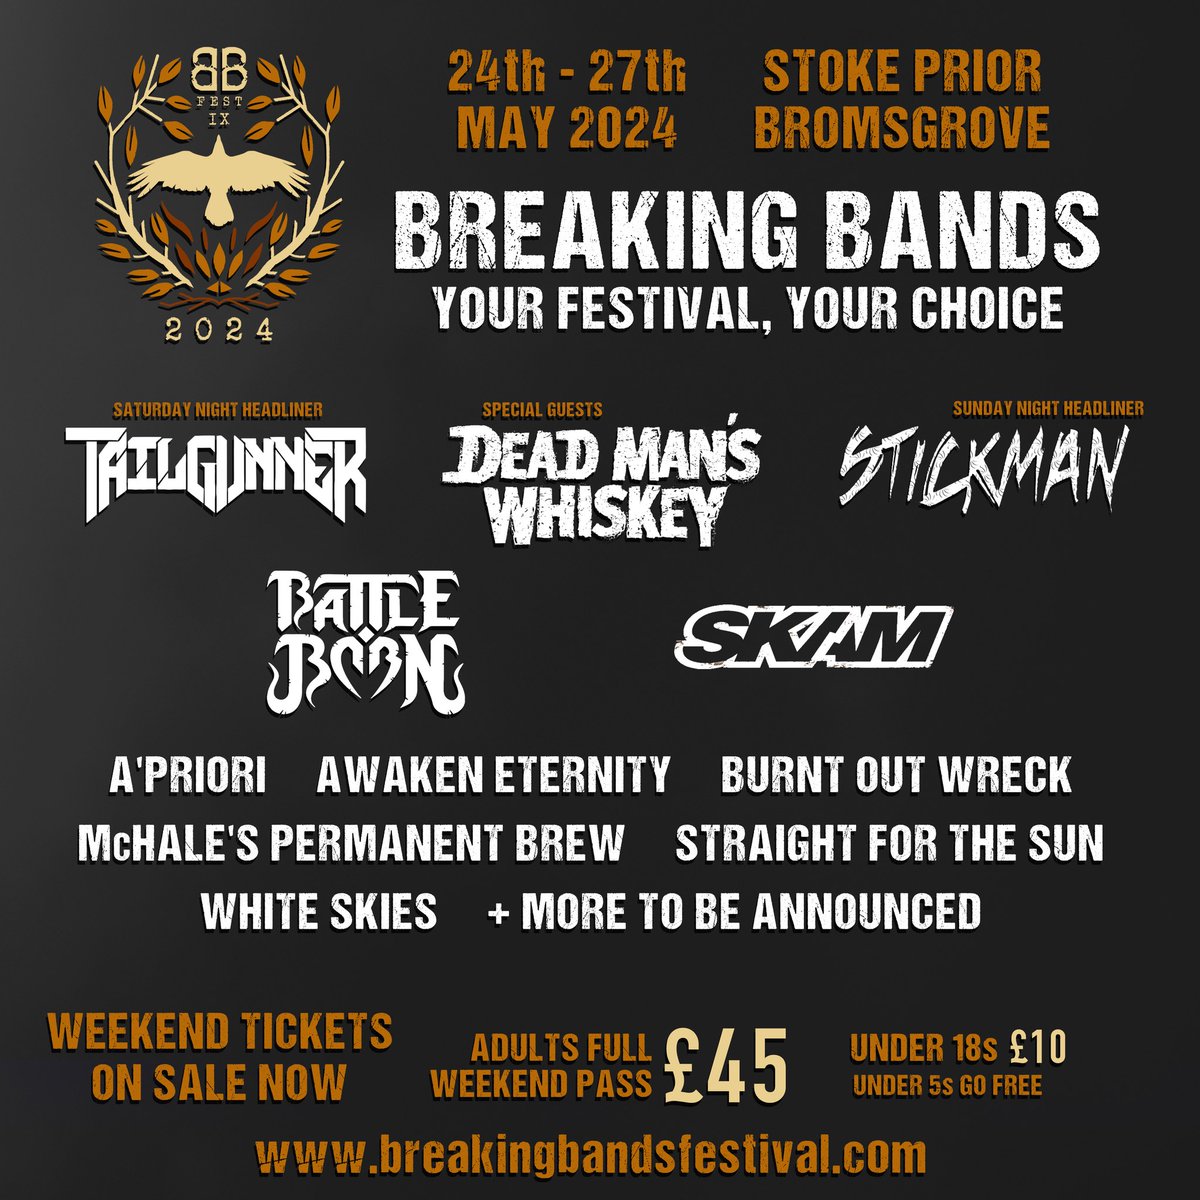 FINE PEOPLE OF BROMSGROVE! We will be at the award winning Breaking Bands Festival this year. Get your tickets and prepare to get your head melted. TICKETS: breakingbandsfestival.com SEE YOU AT THE BAR....